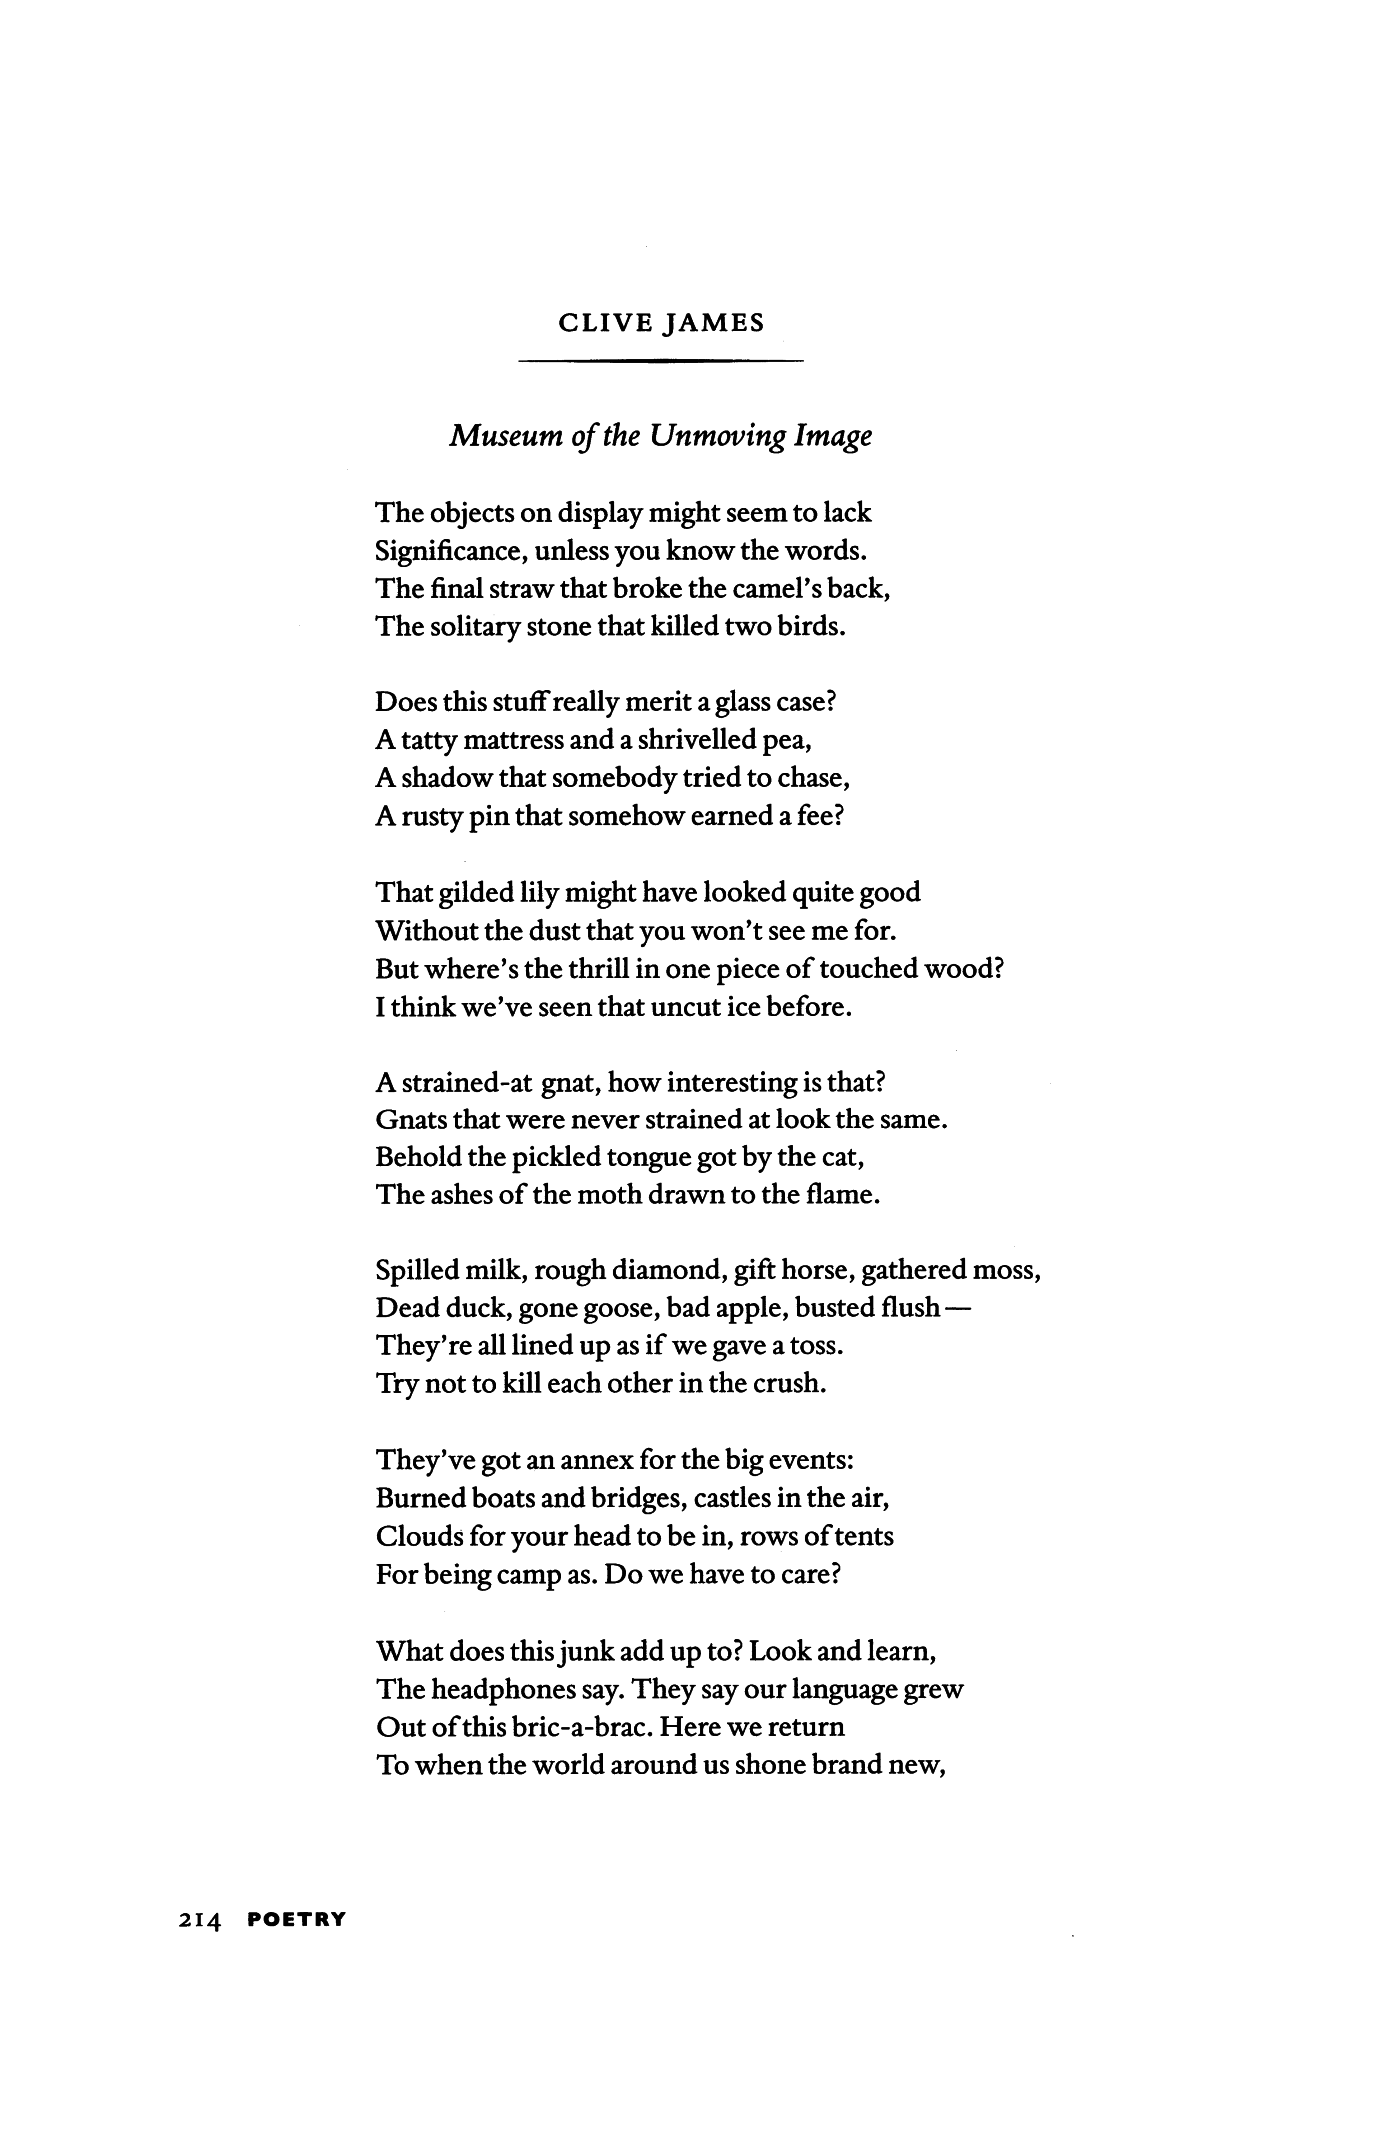 thrill of the chase poem